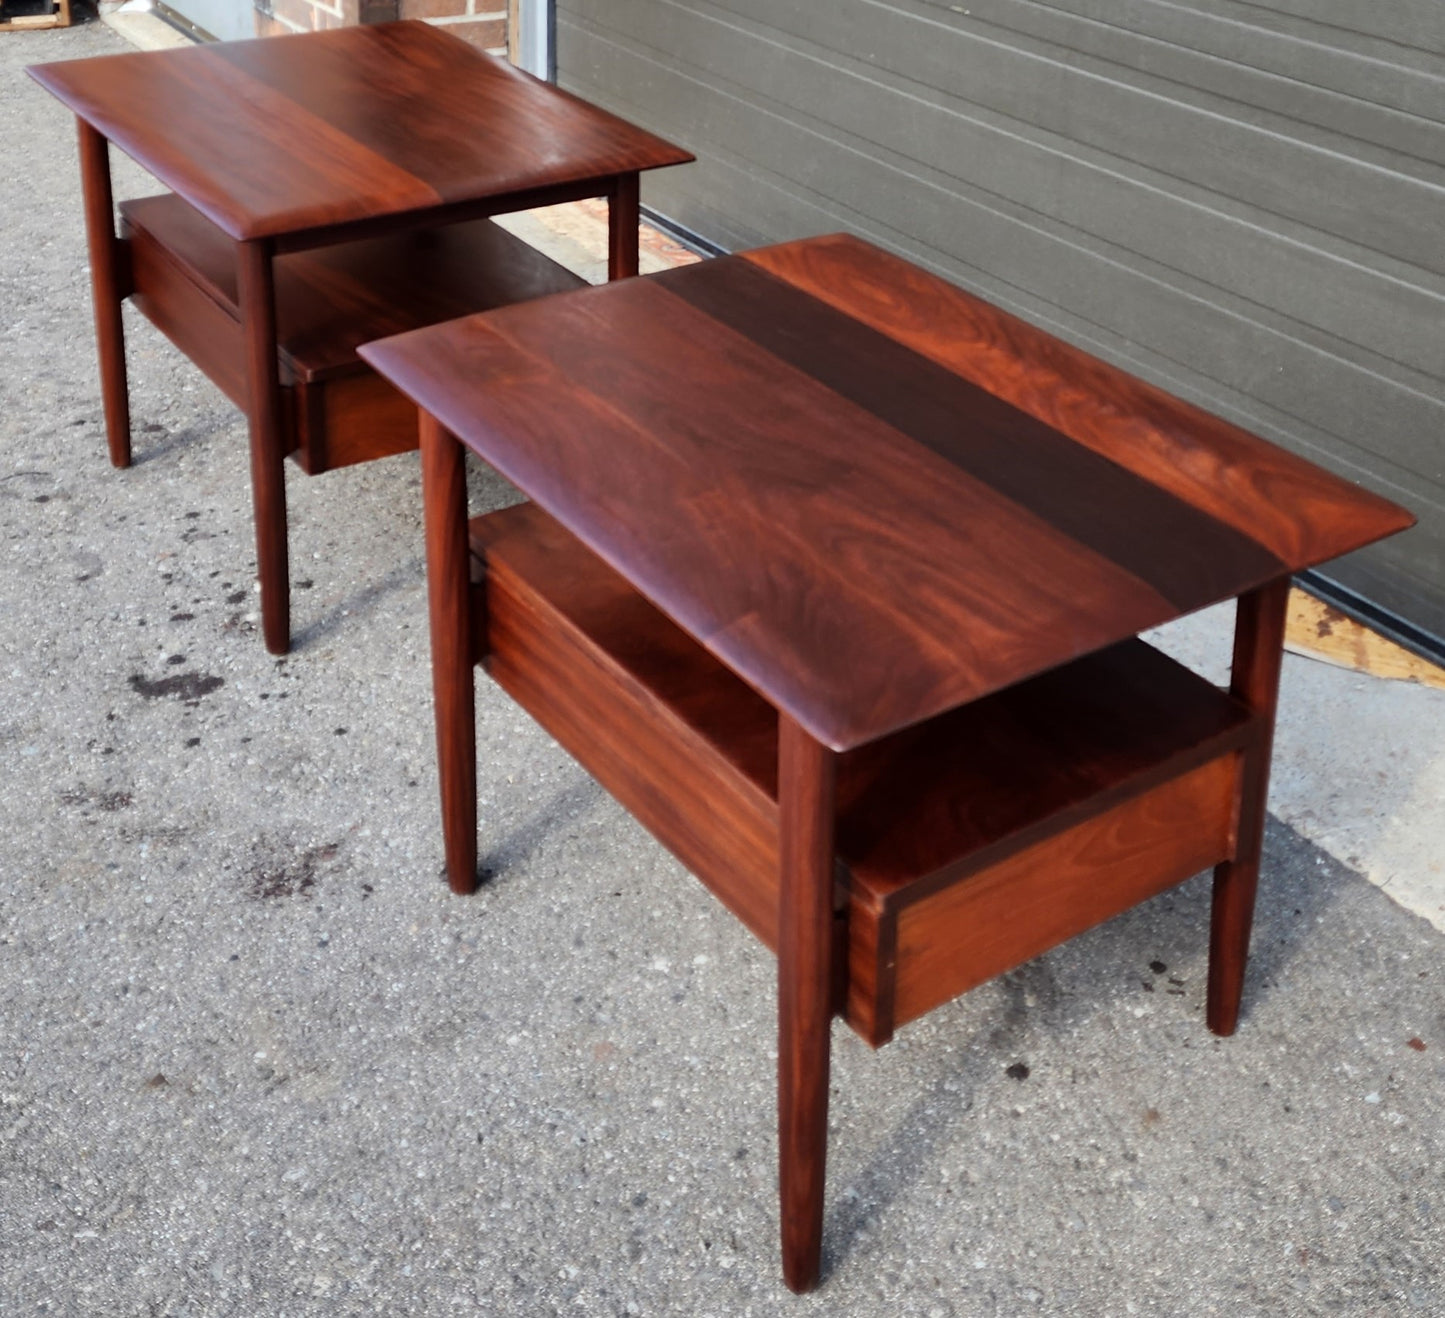 Coming***REFINISHED Mid Century Modern Solid Teak Side Table w Drawers by Imperial (2 available)